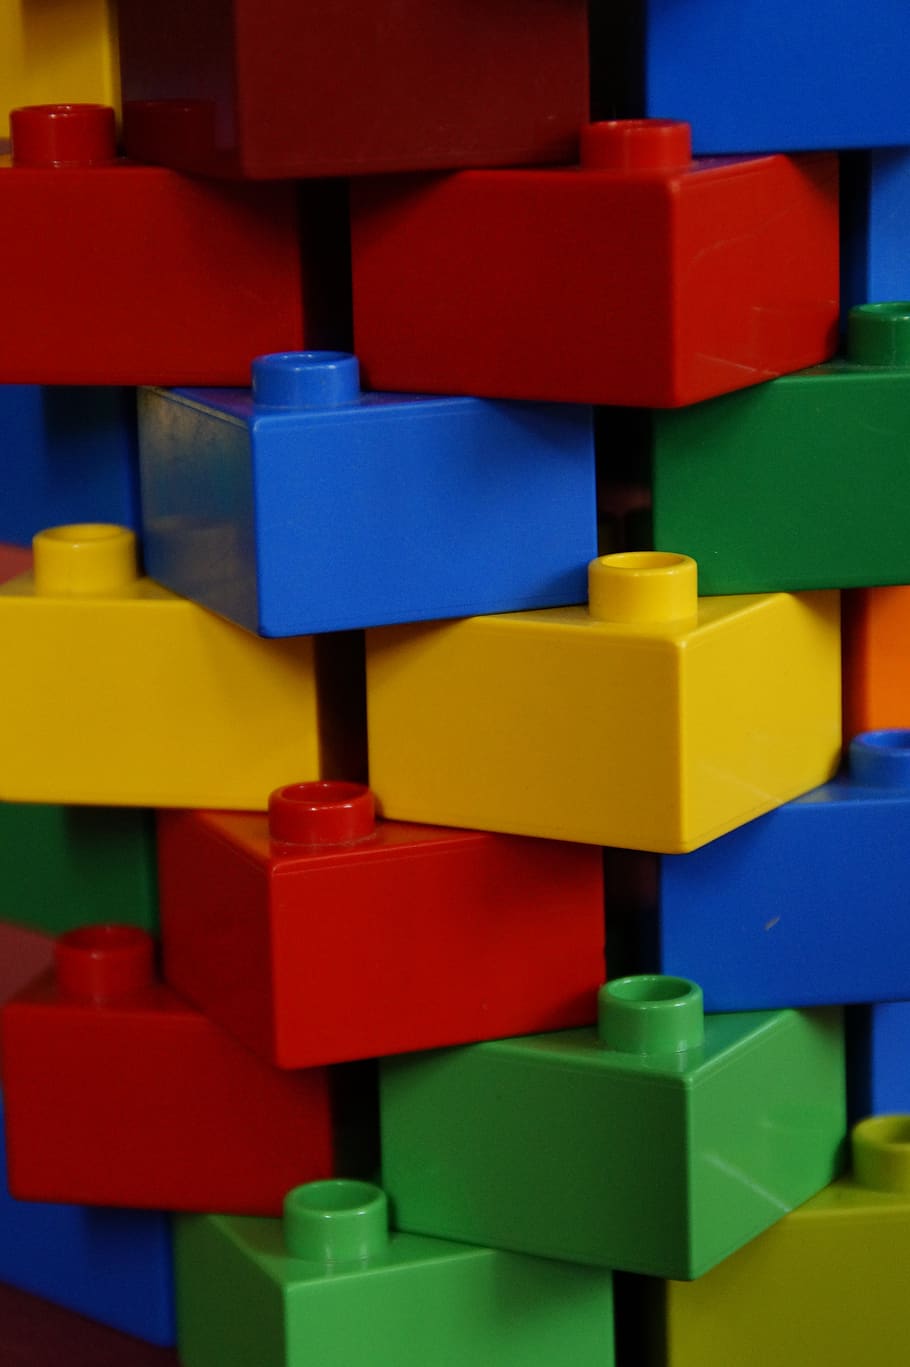 tower, stone wall, lego blocks, colorful, child, children toys